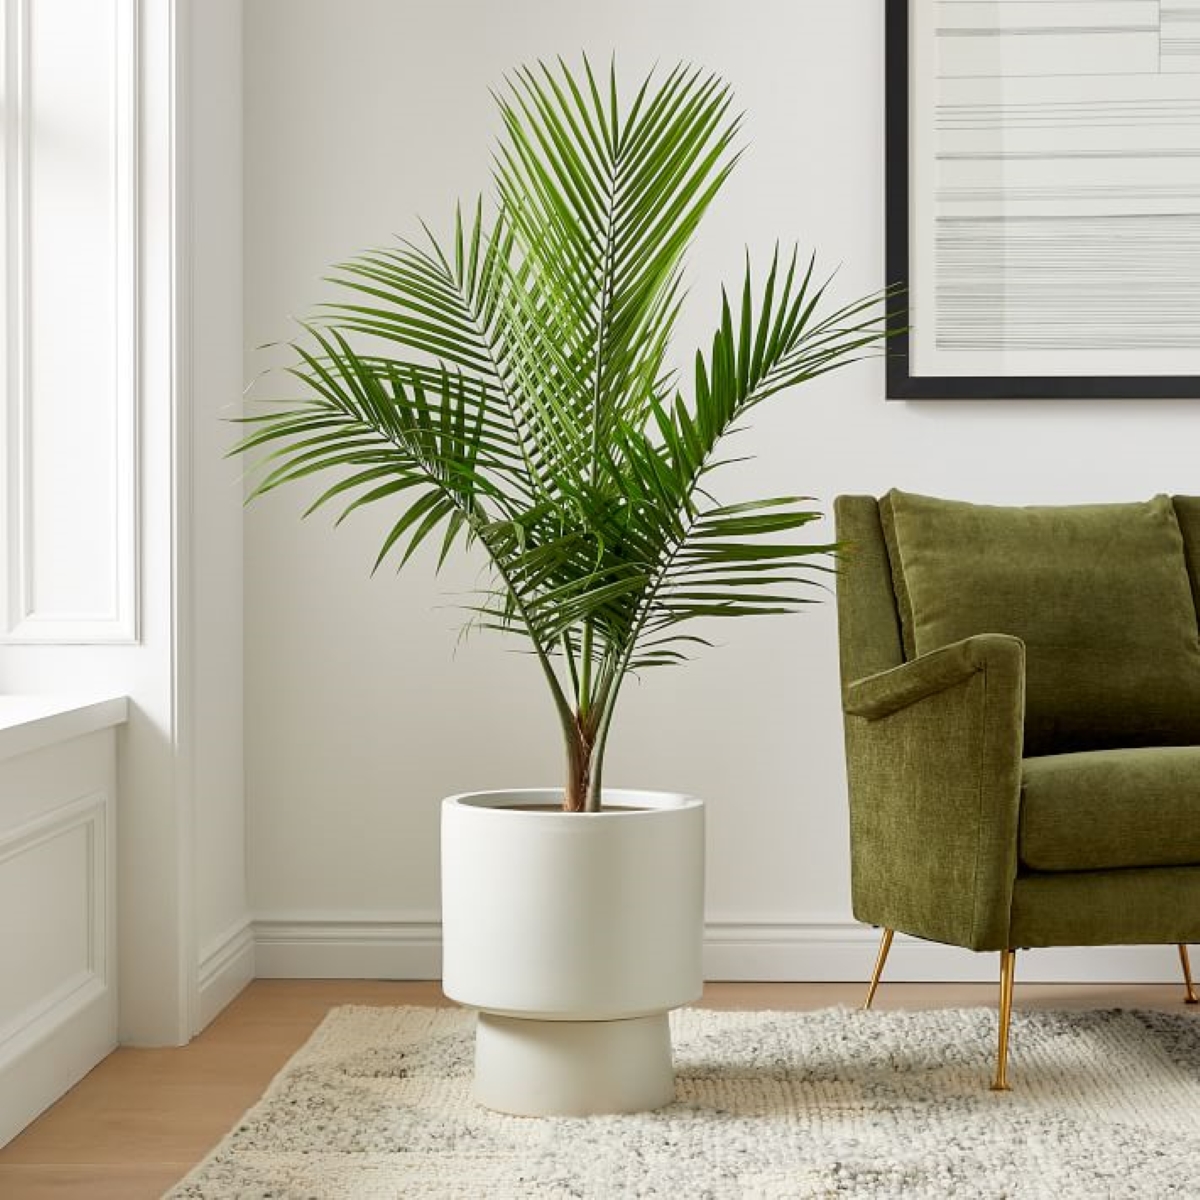 Large green plant in living room